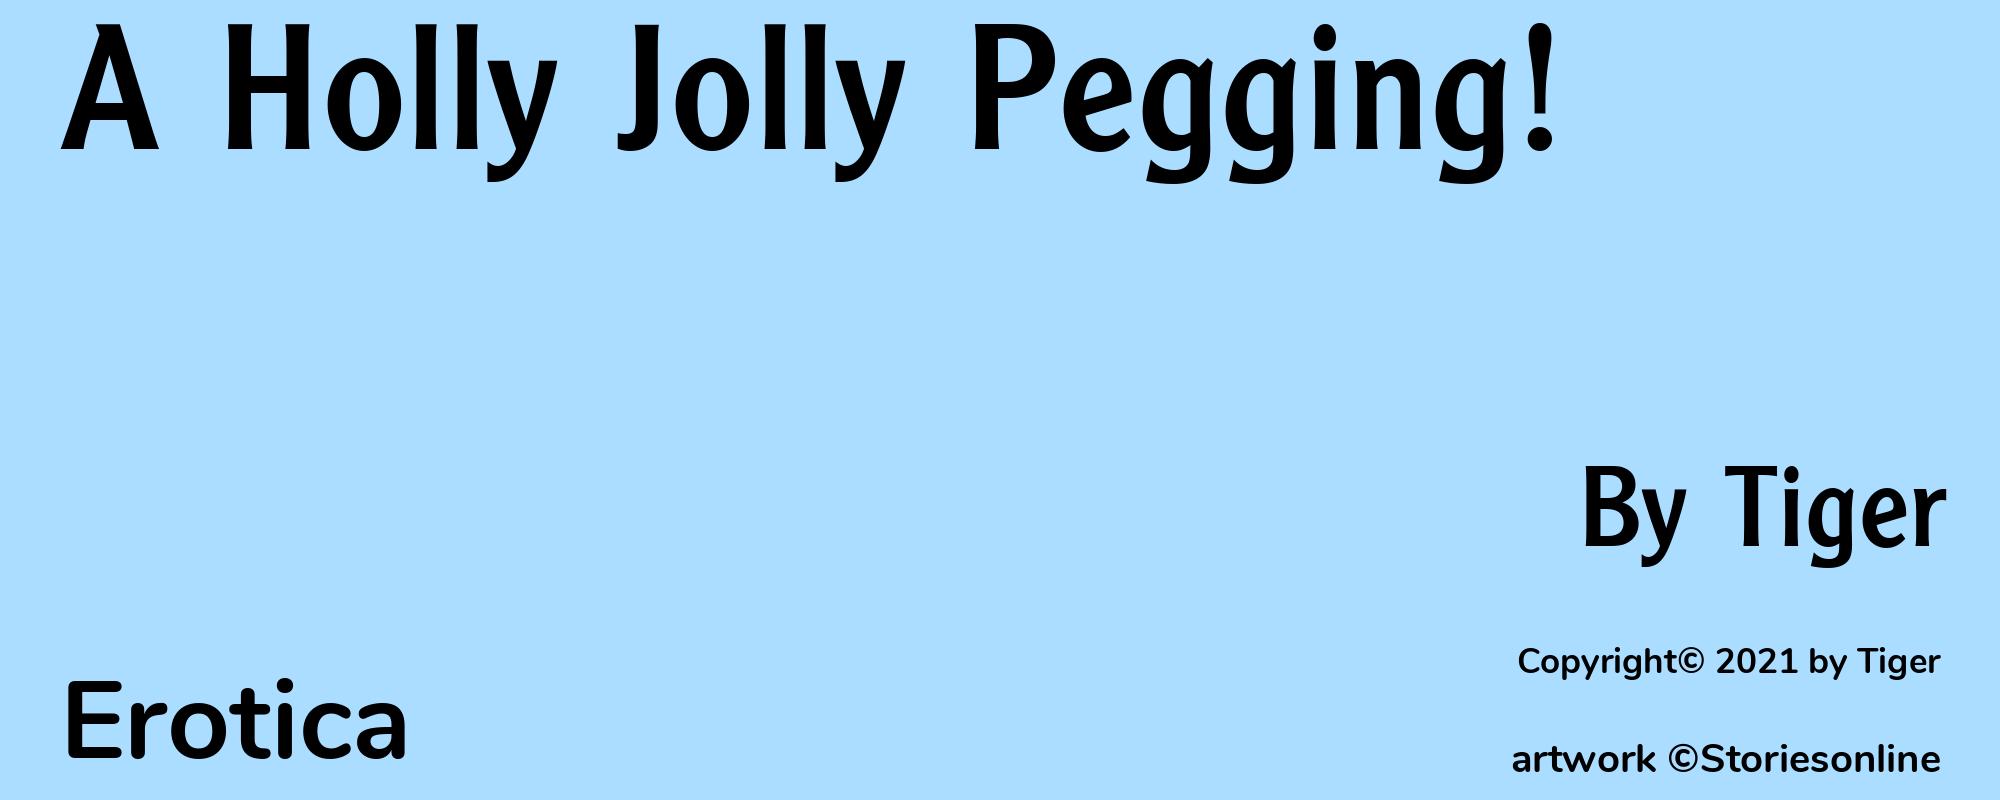 A Holly Jolly Pegging! - Cover